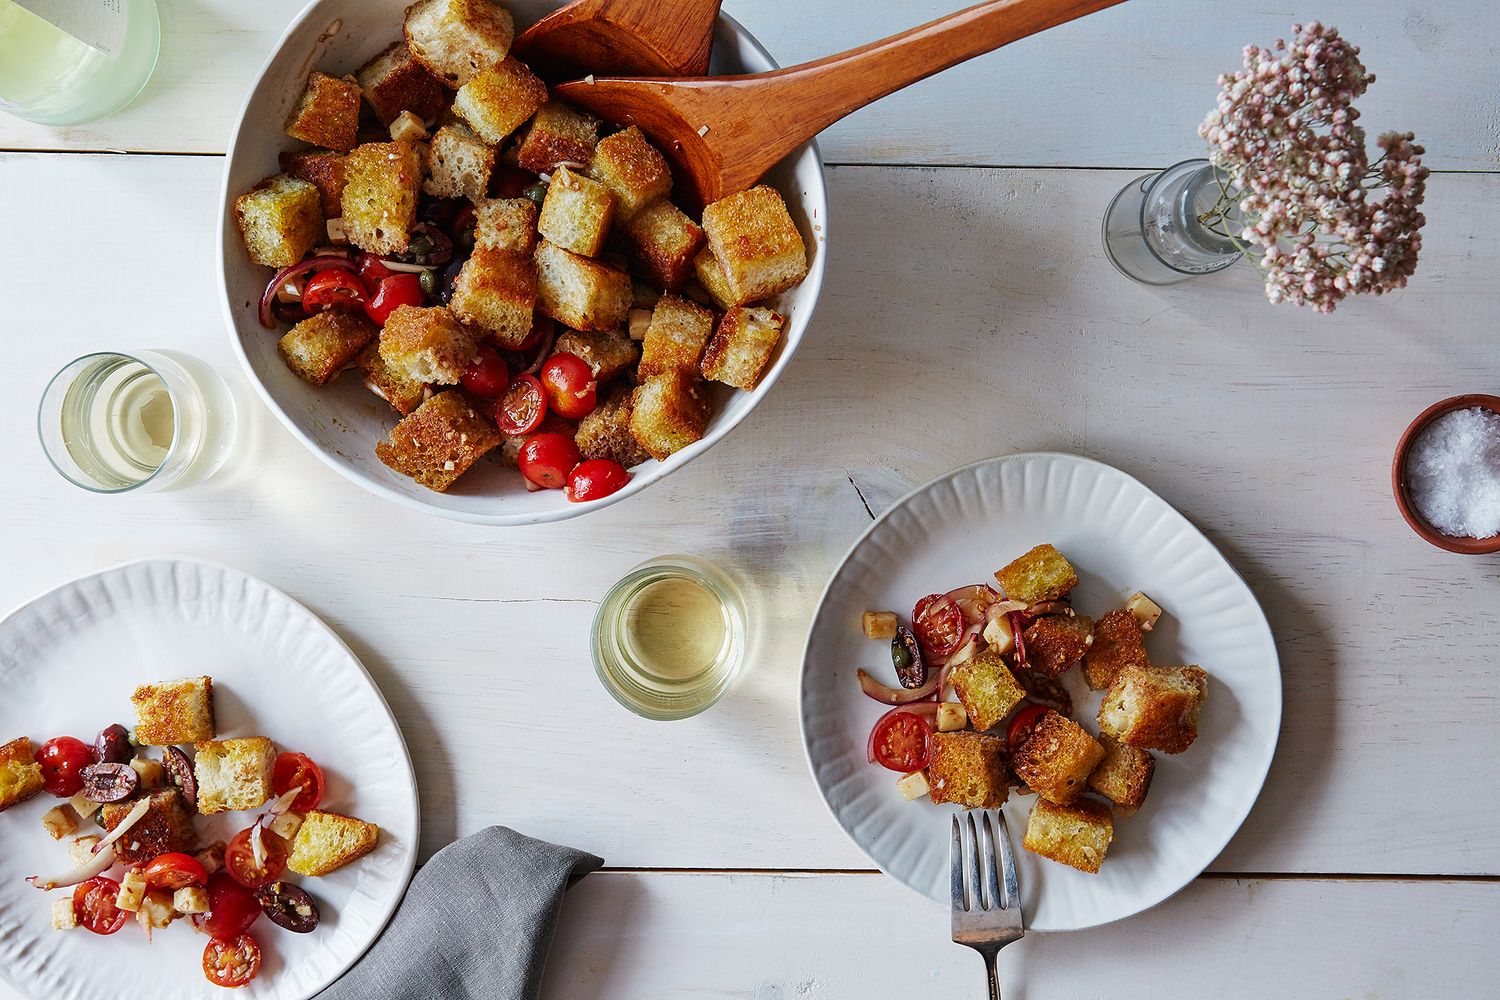 Recipes of dishes. Летние горячие блюда. Parmesan, Capers, Croutons. Croutons dish. Crunchy garlic Croutons.